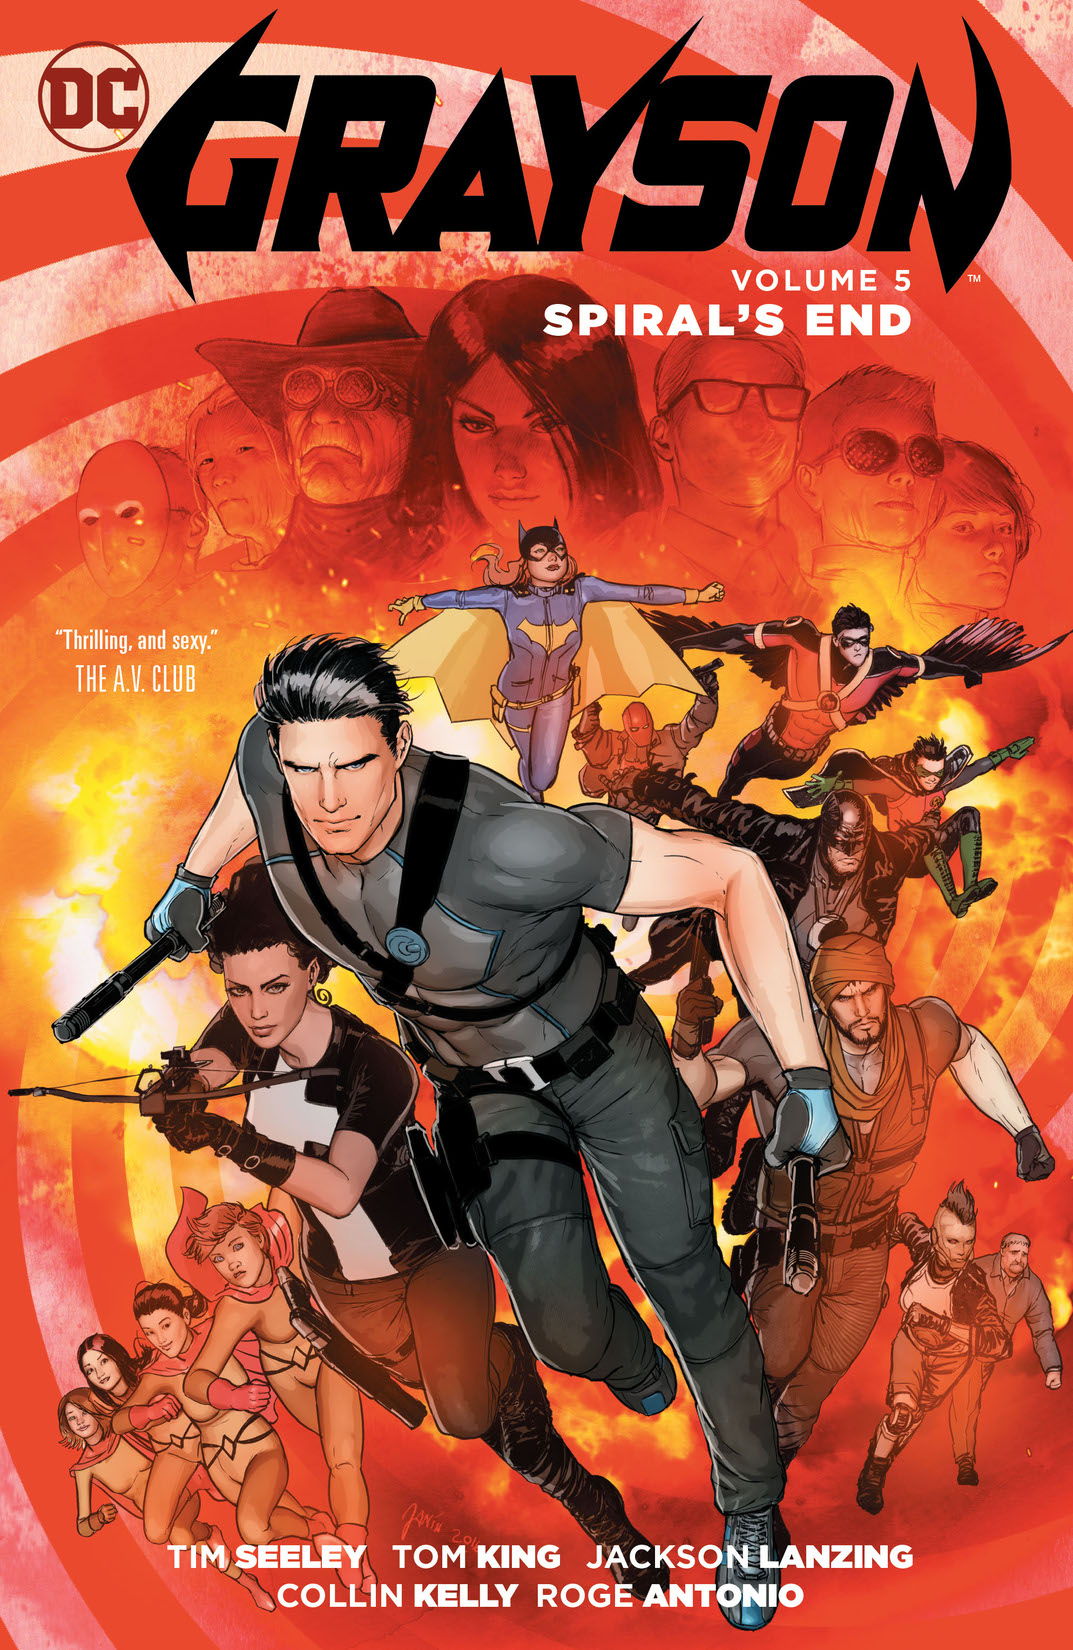 Grayson Vol. 5: Spiral's End preview images